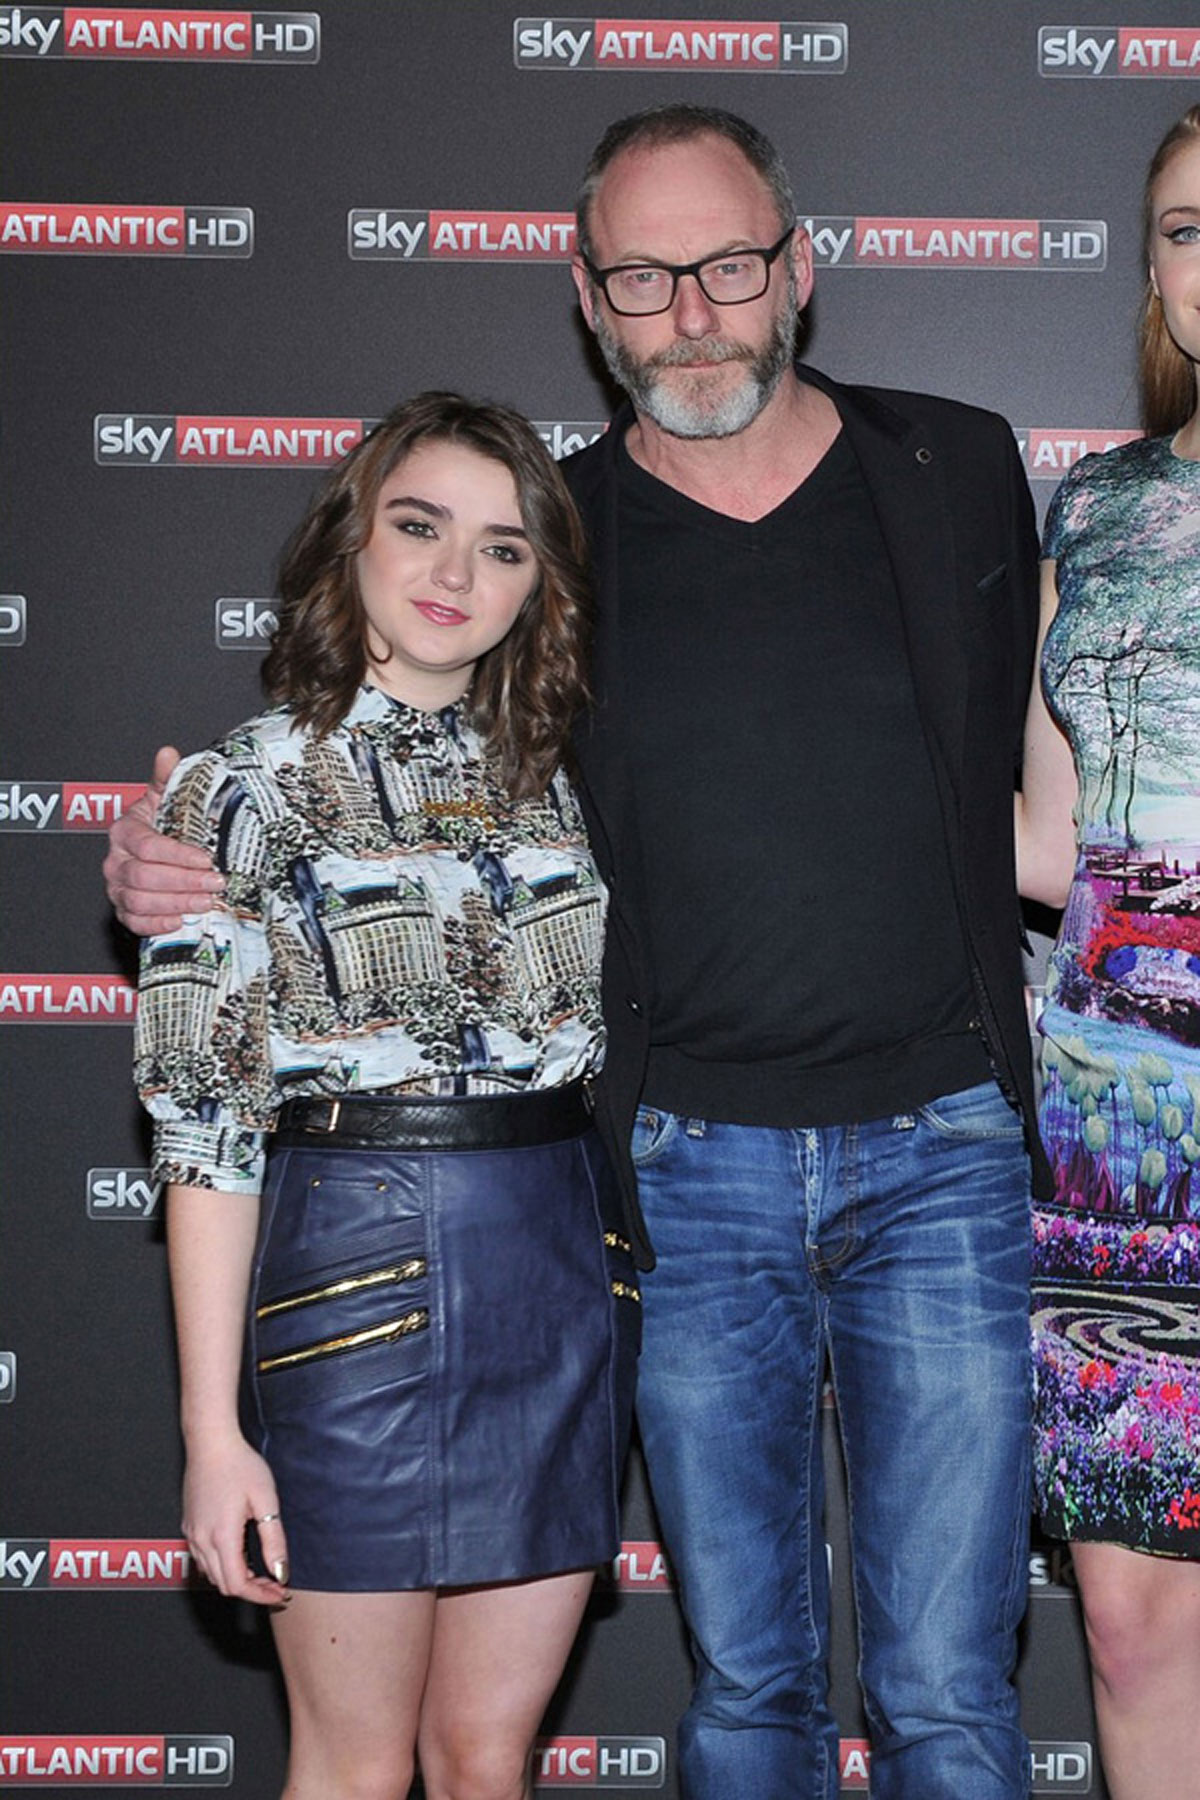 Maisie Williams attends Game Of Thrones premiere